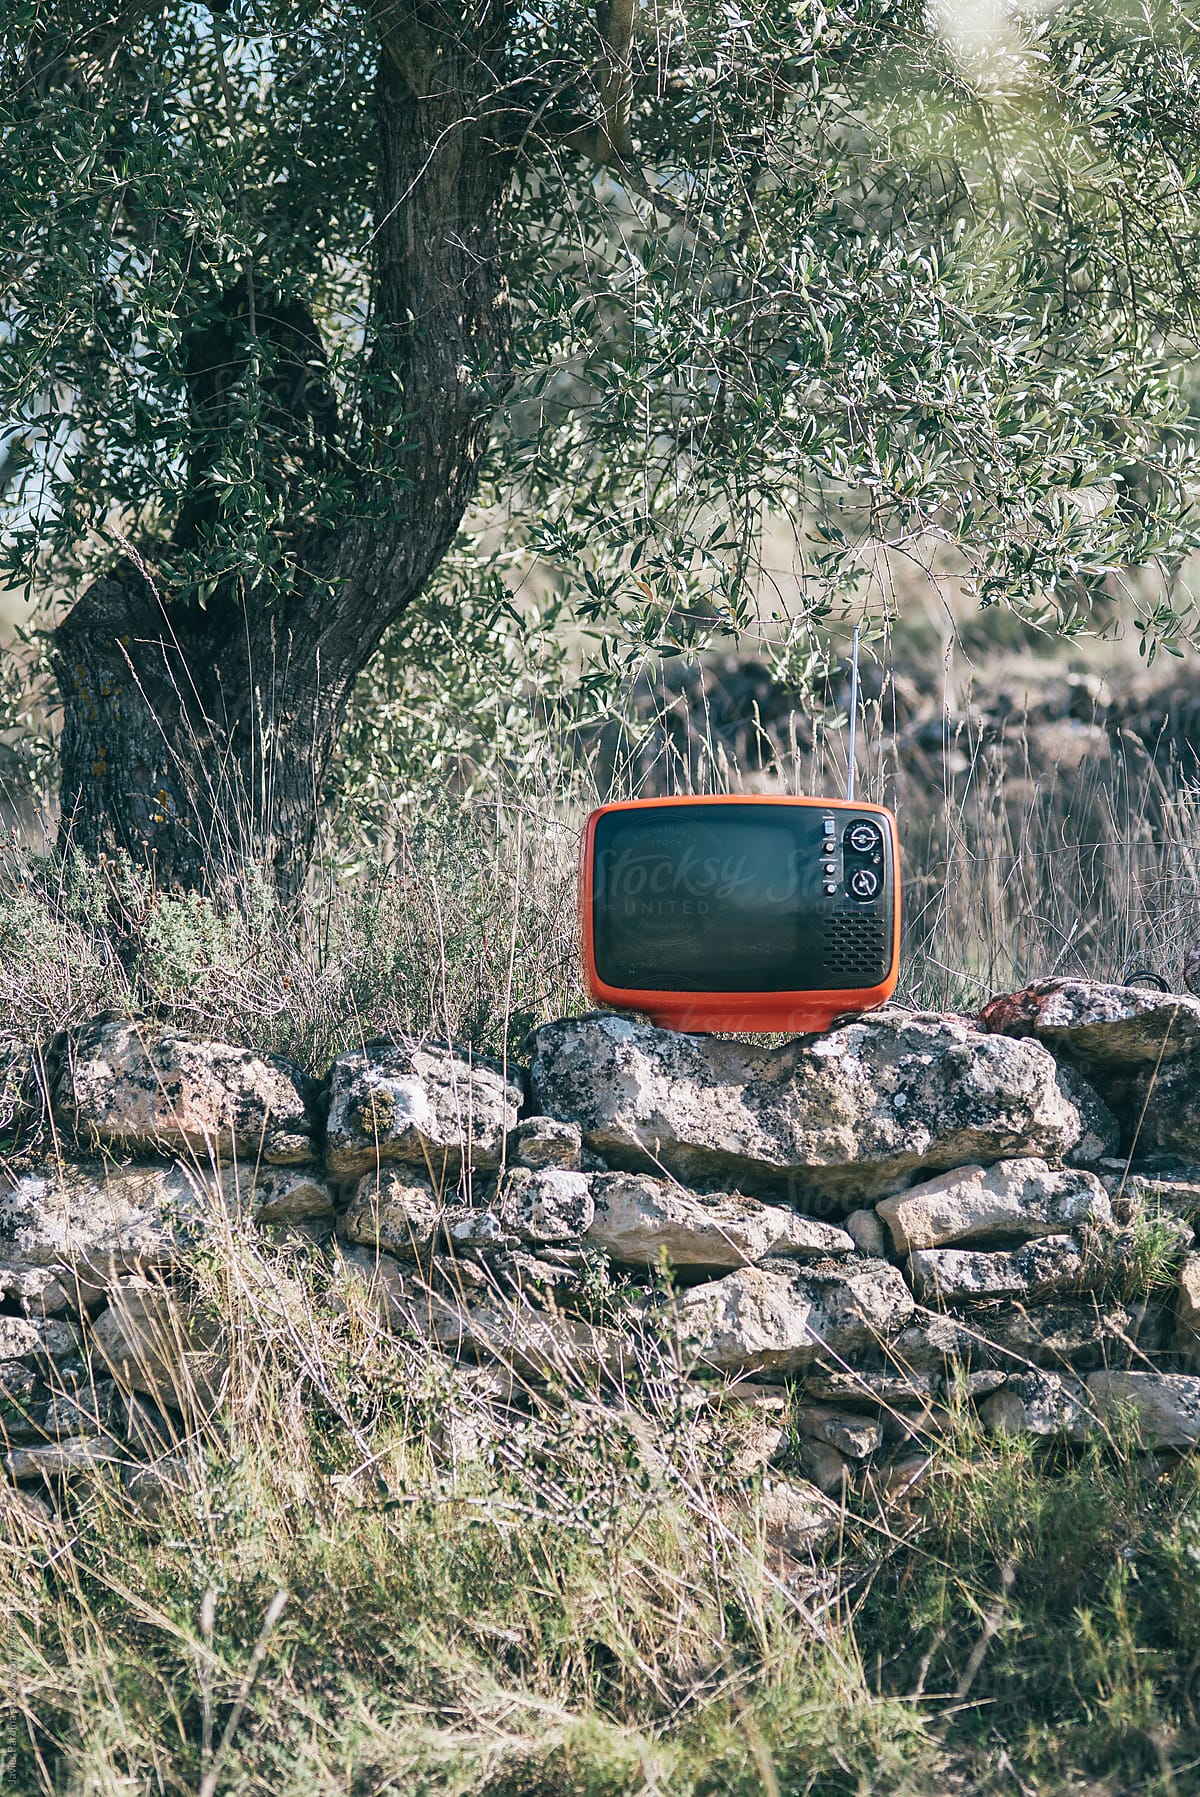 Portrait of an old television, placed on nature.